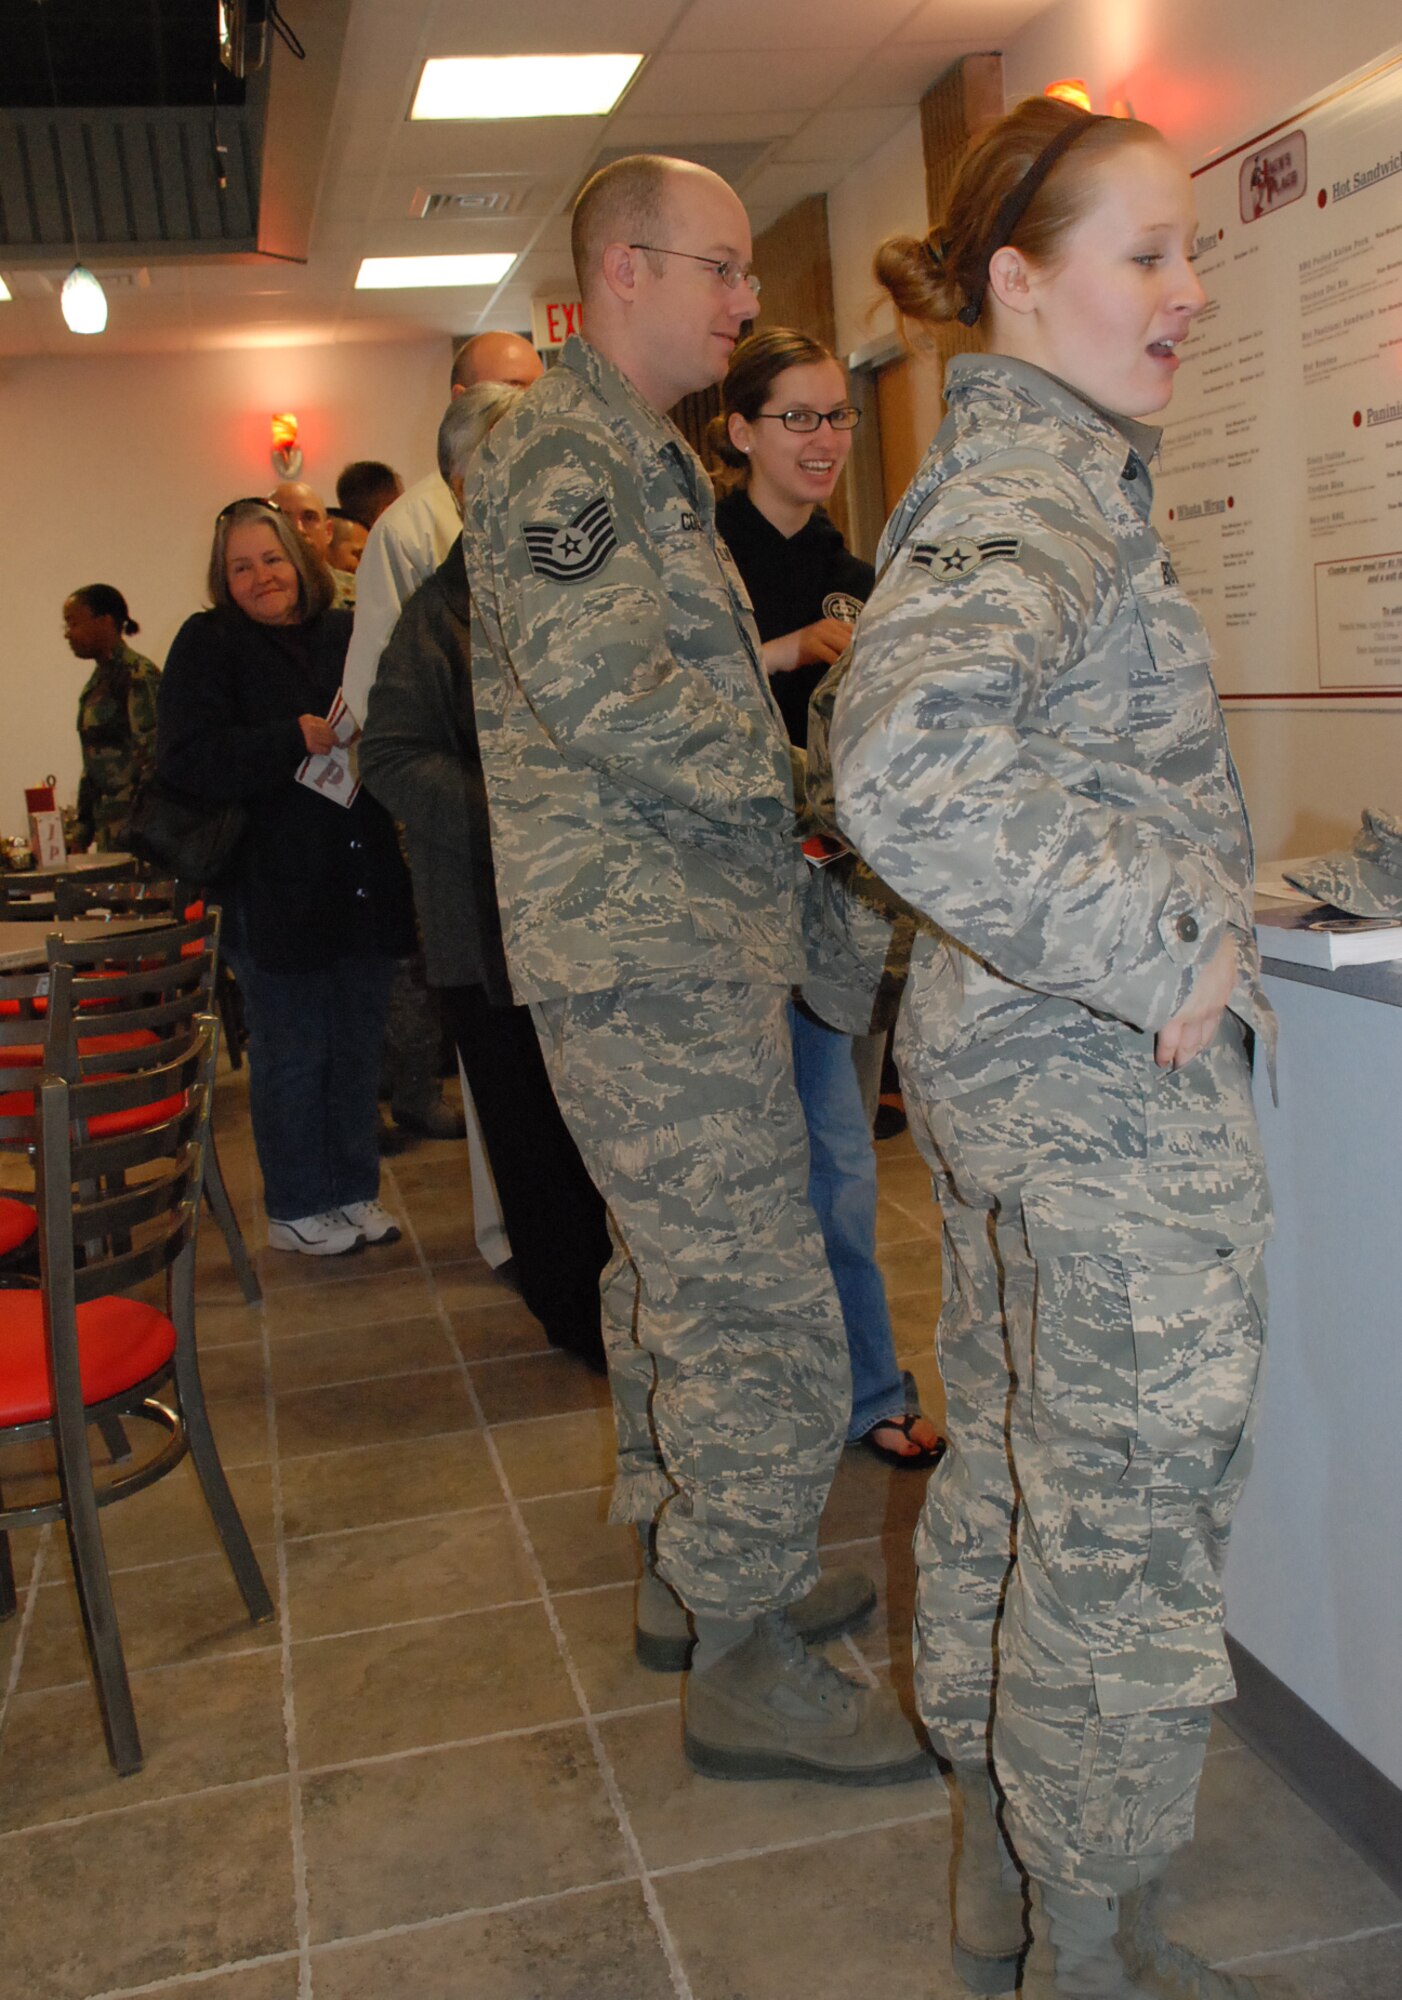 LAUGHLIN AIR FORCE BASE, Texas – Airmen stand in line at Jack’s Place, a new restaurant on base featuring a sports bar atmosphere, for coming to the grand opening here Jan. 29. Before the opening Col. John Doucette, 47th Flying Training Wing commander, thanked Airmen outside. Colonel Doucette said the restaurant’s opening was a result of Team XL teaming up. “Nothing happens on this base without everyone working together, and we’re going to keep modifying the menu to keep people coming here,” he added.  (U.S. Air Force photo by 1st Lt. Courtney Kippenberger)